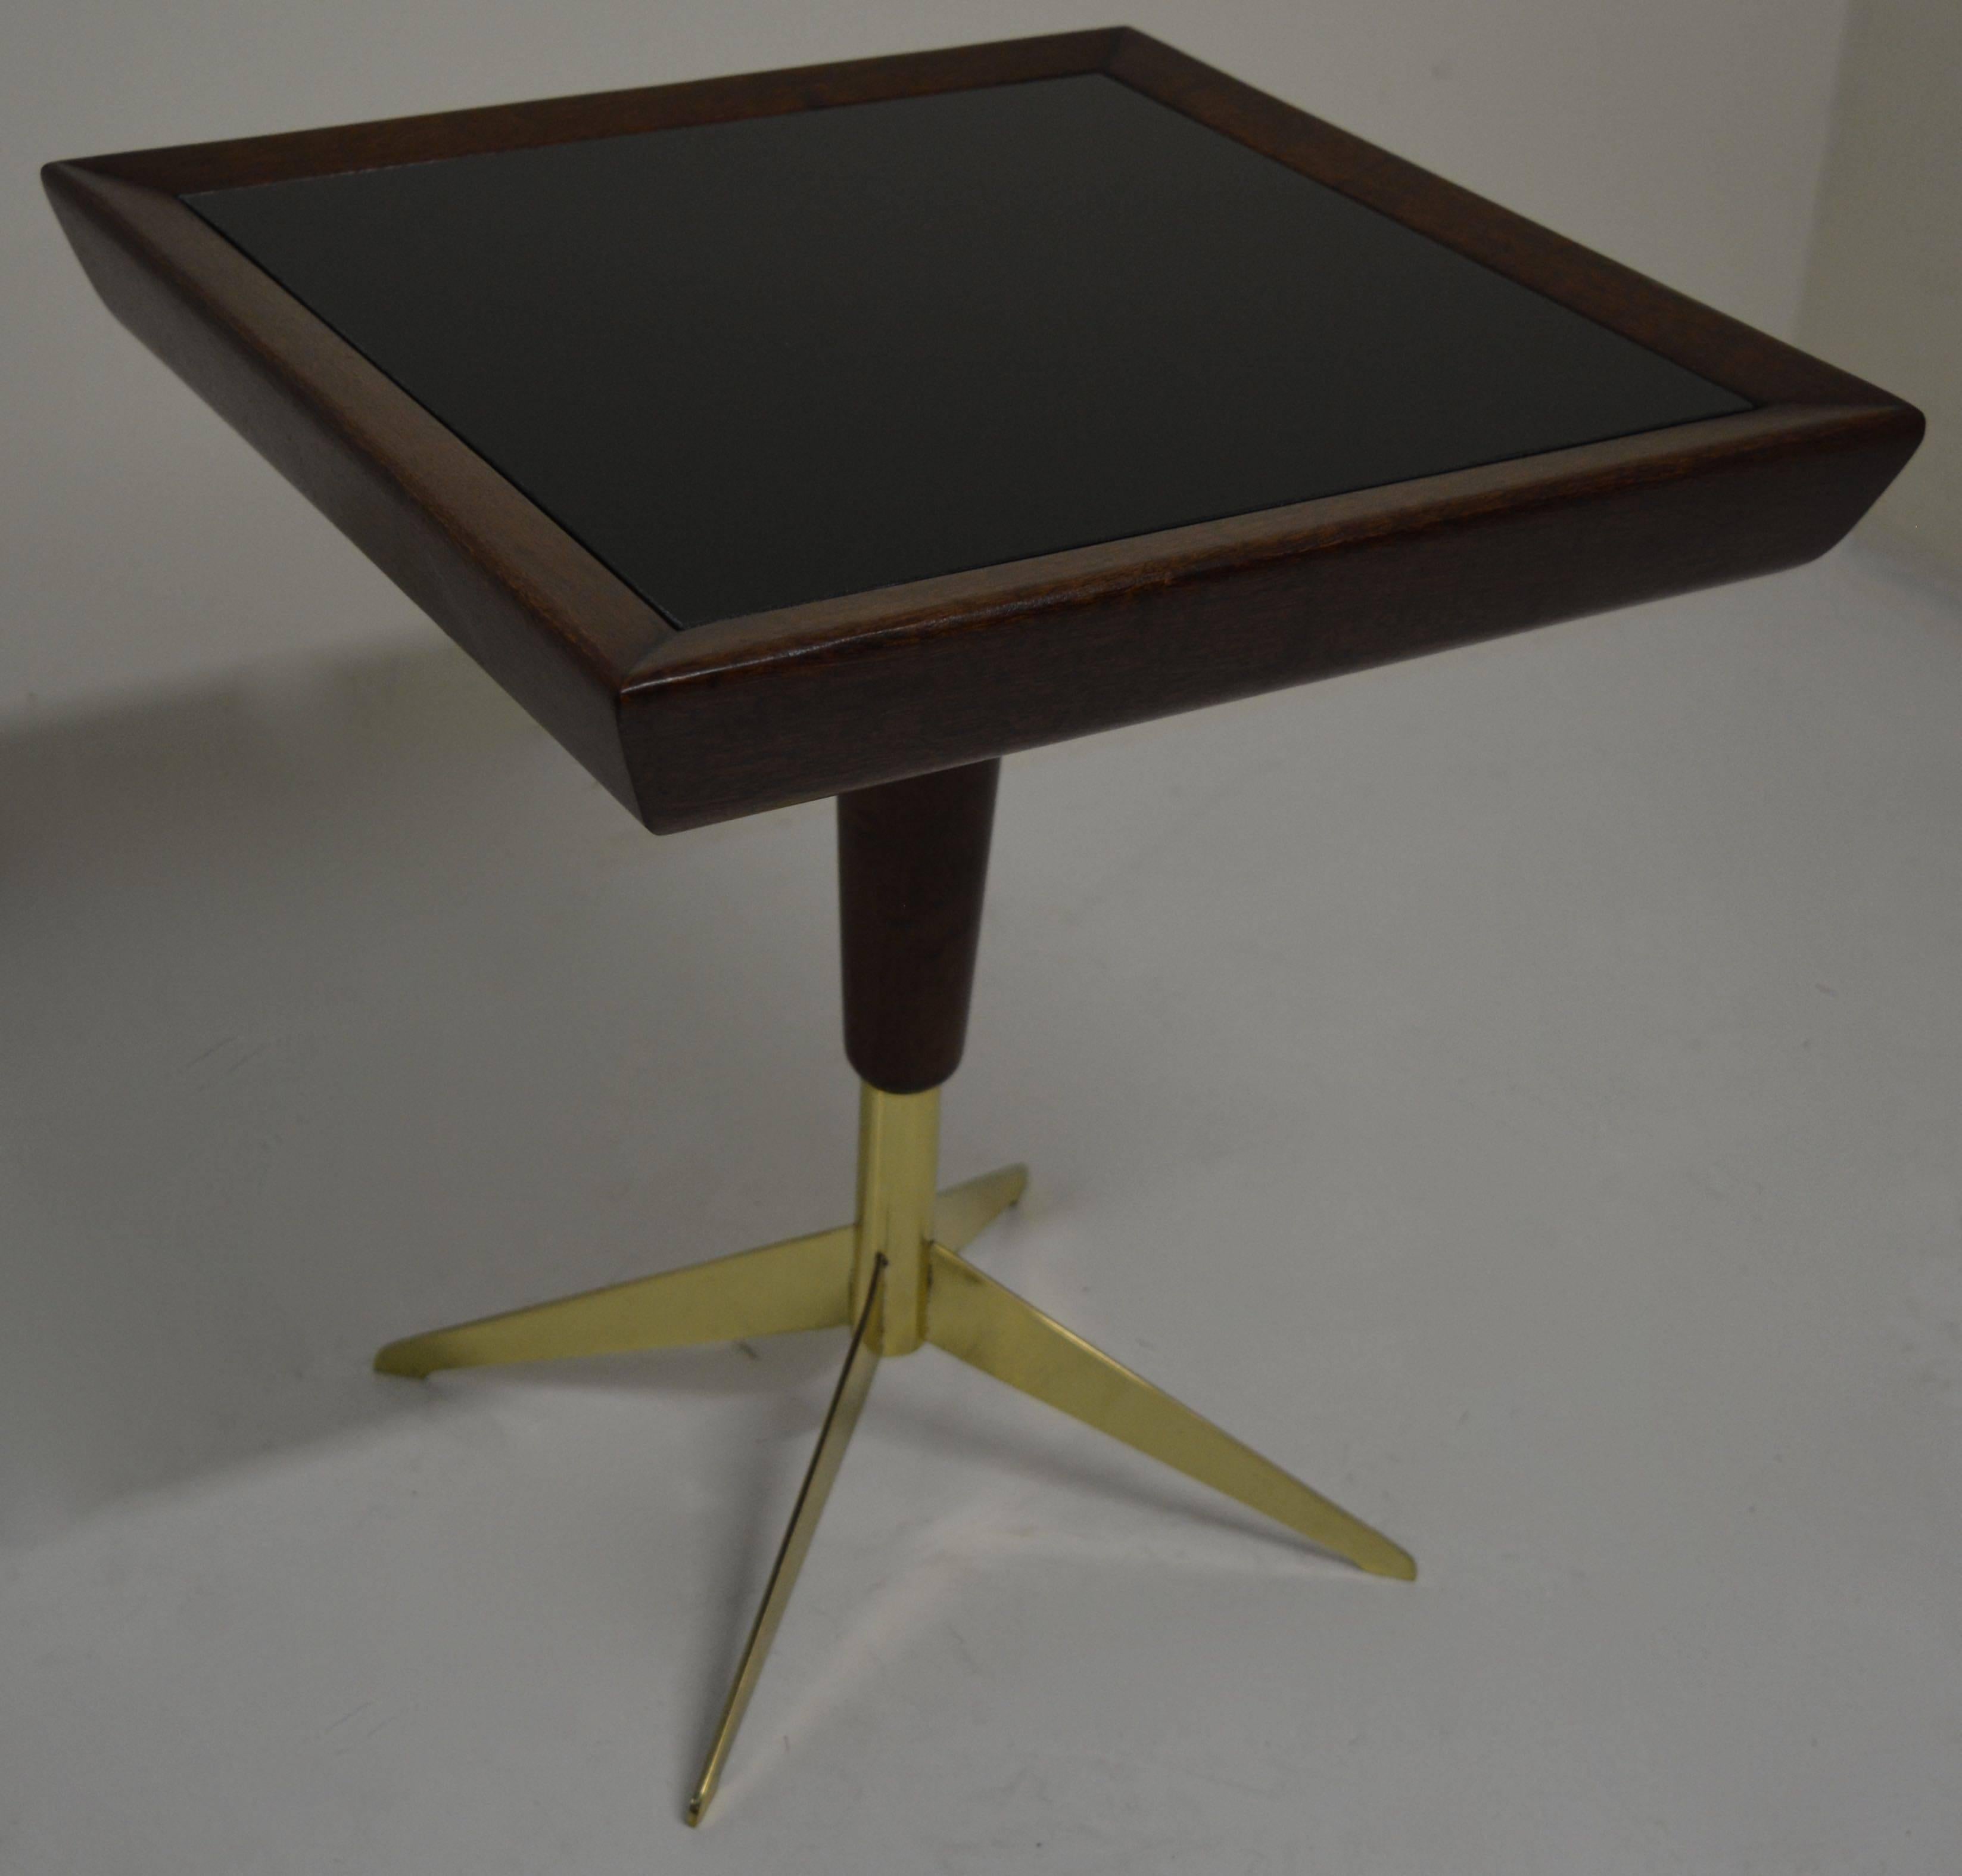 Petite Italian occasional table in walnut with polished brass base and black glass top, circa 1950s. This table has been restored and is ready for another 60 years of service. Perfect for the small area between a pair of chairs where a full-size